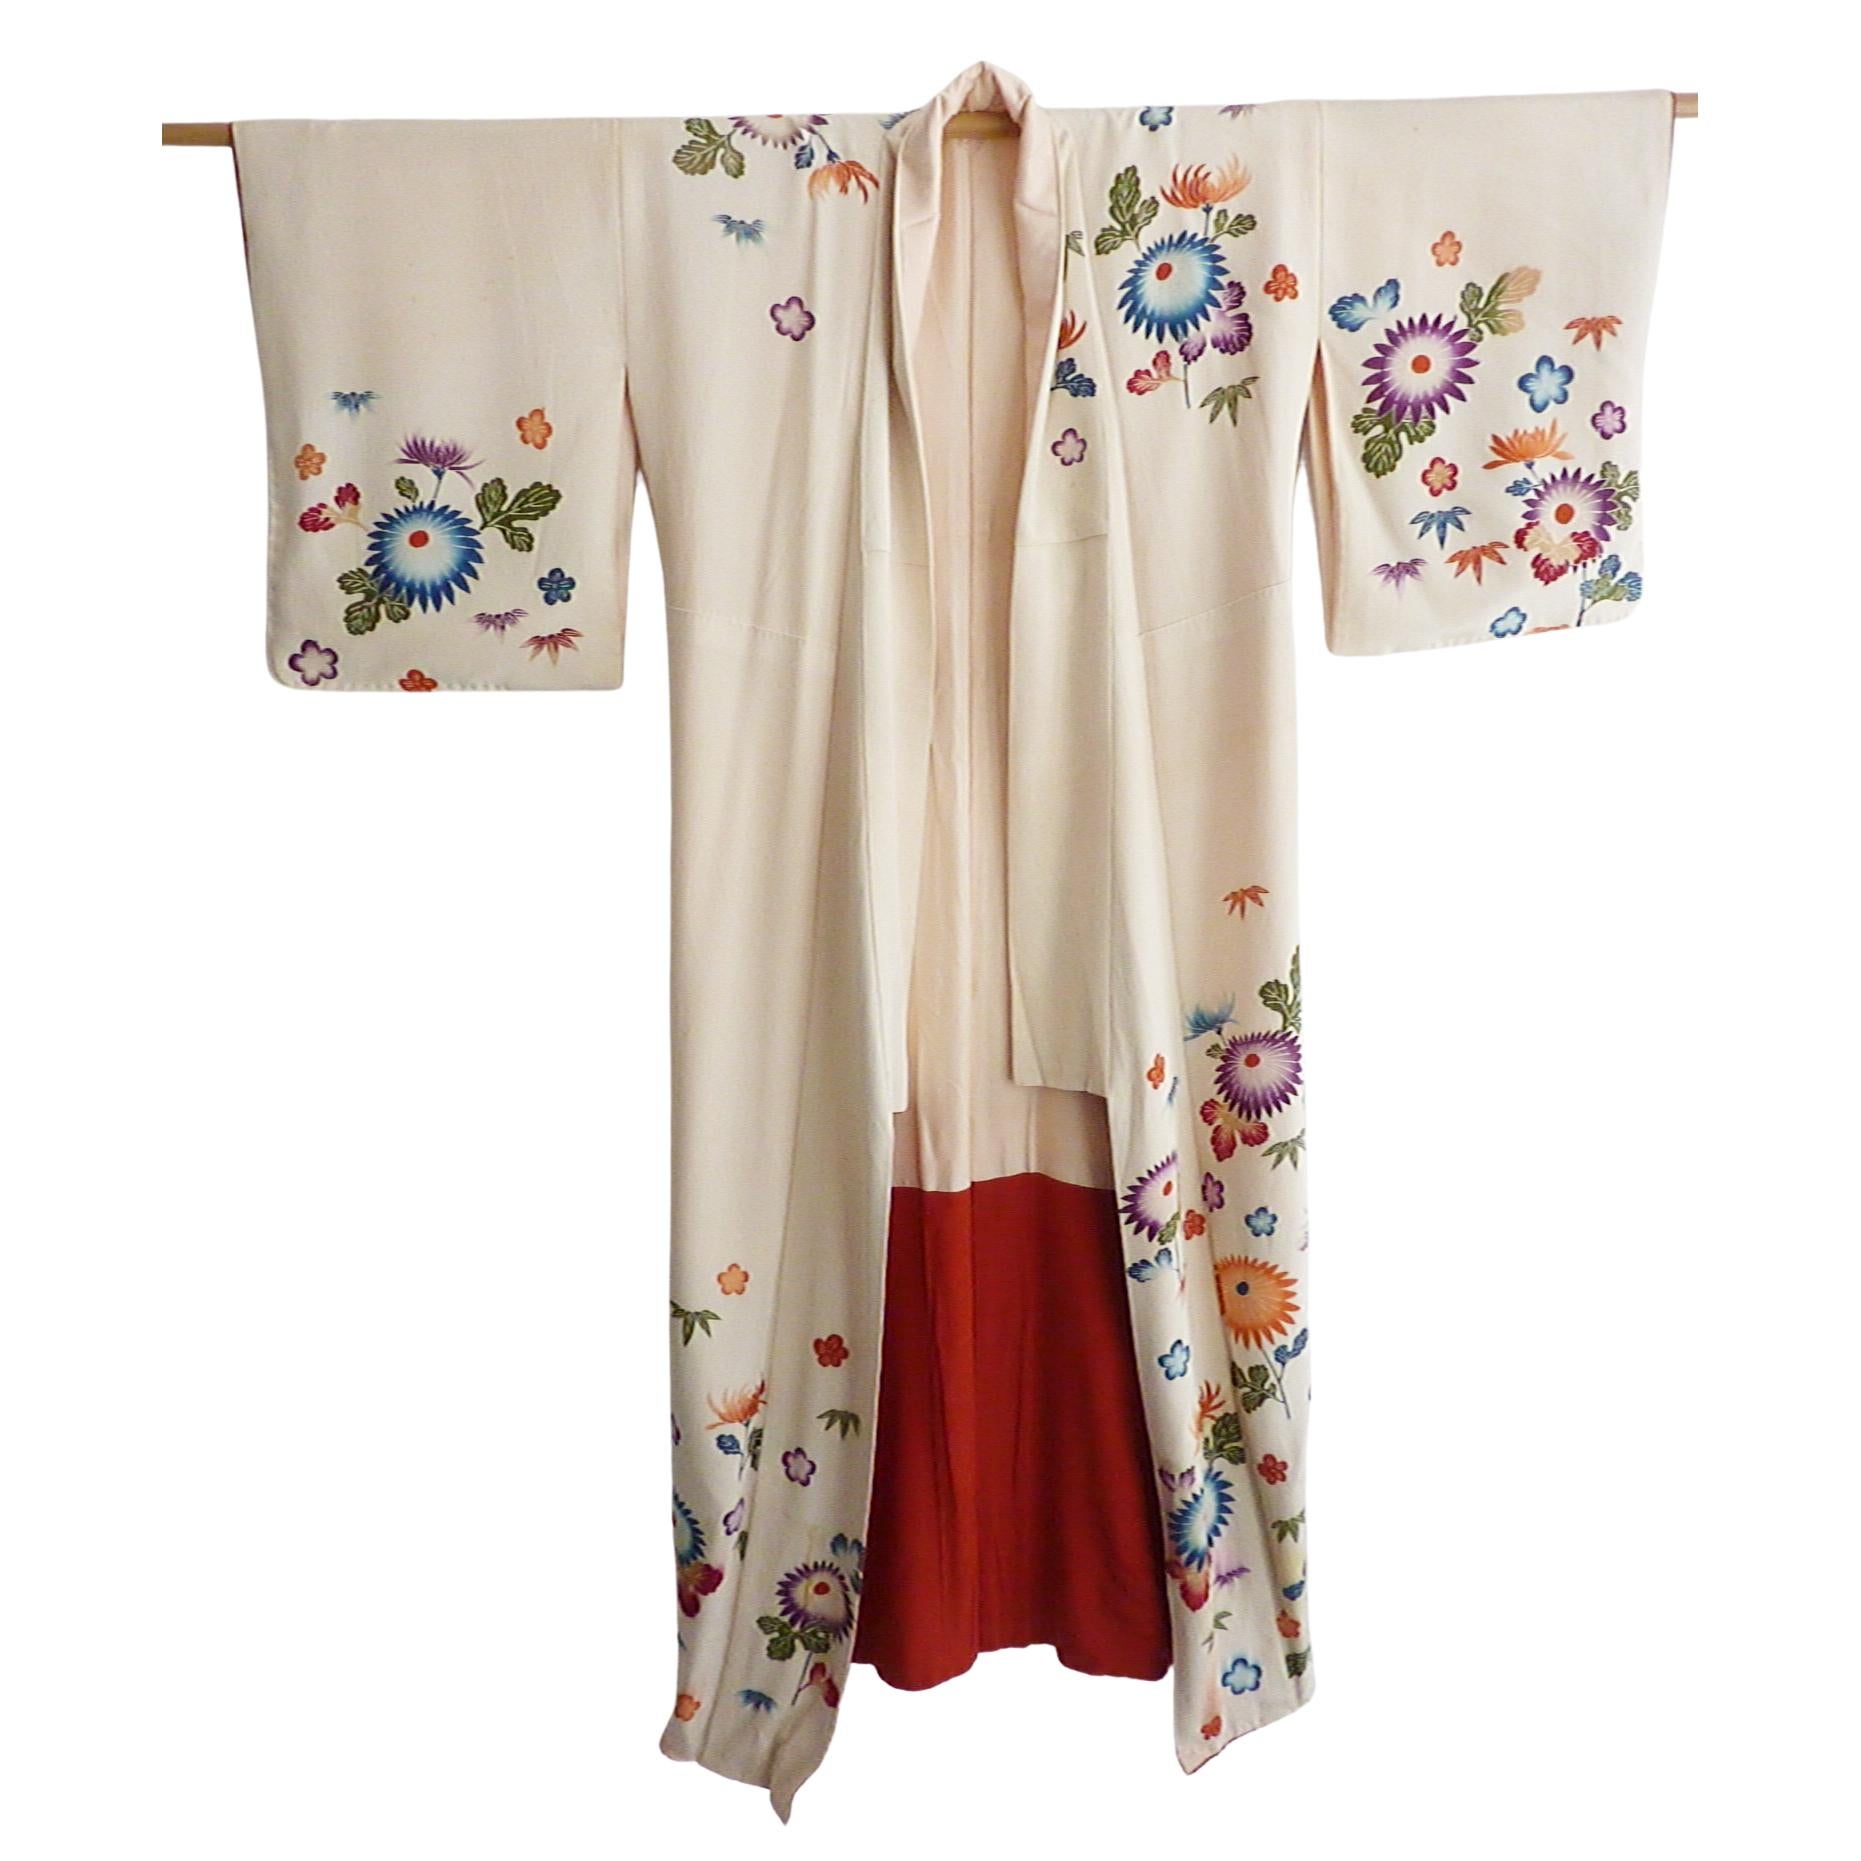 Gorgeous luxurious pure silk kimono.
Lined in silk with dramatic crimson red bottom lining. 
Circa: 1920-1930
Place of Origin: Japan
Material: Silk Condition: Good/fair 
Color: Rich vanilla ecru color background with handpainted floral.
Some age